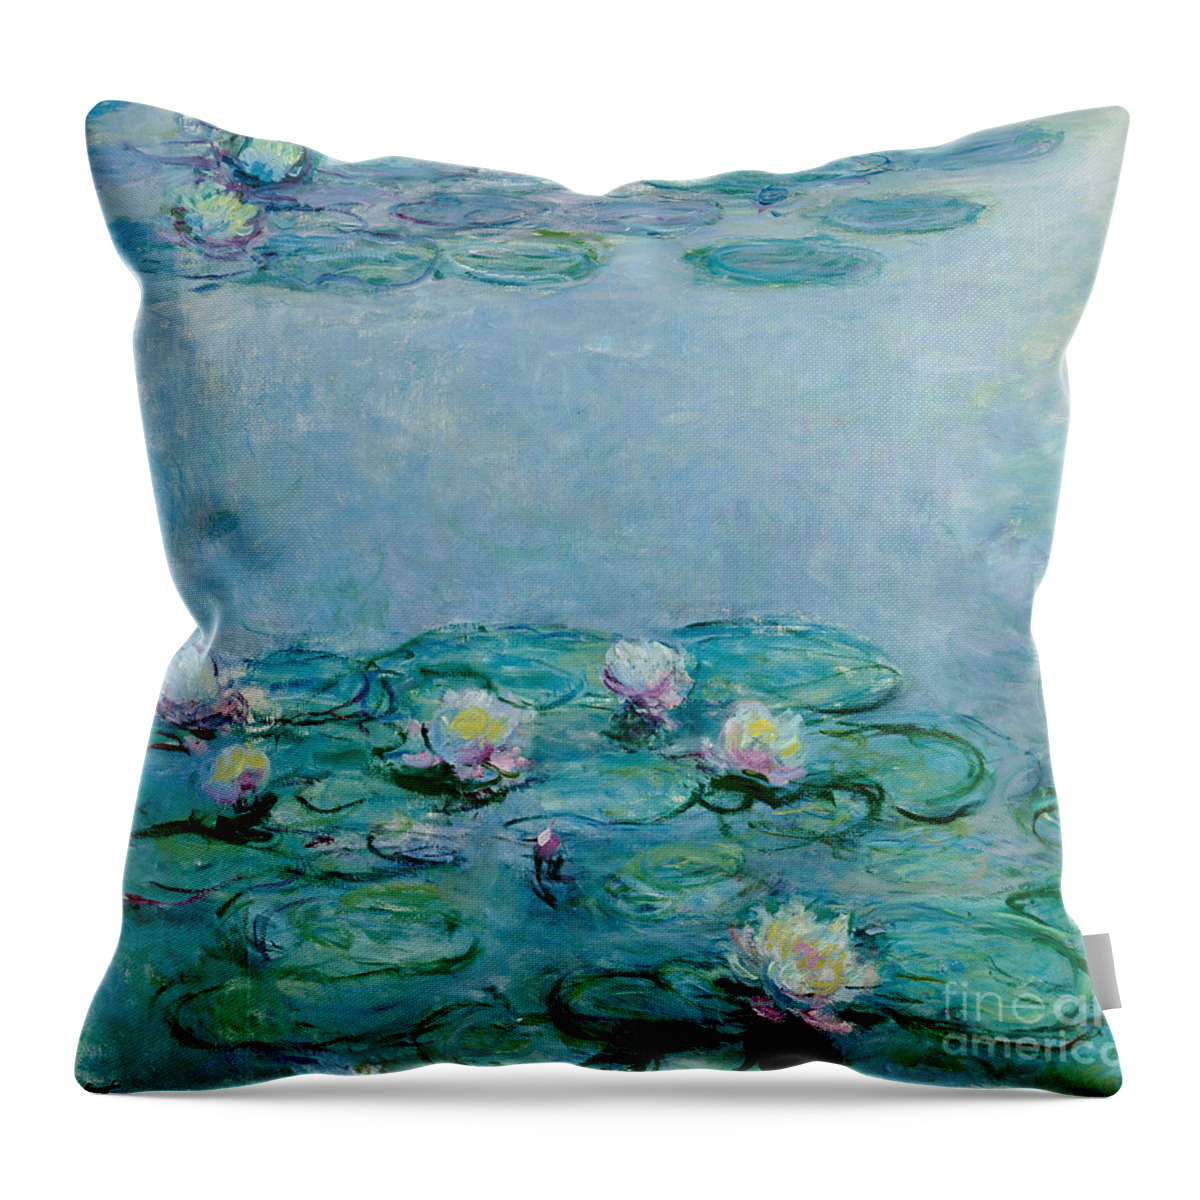 French Throw Pillow featuring the painting Water Lilies by Claude Monet